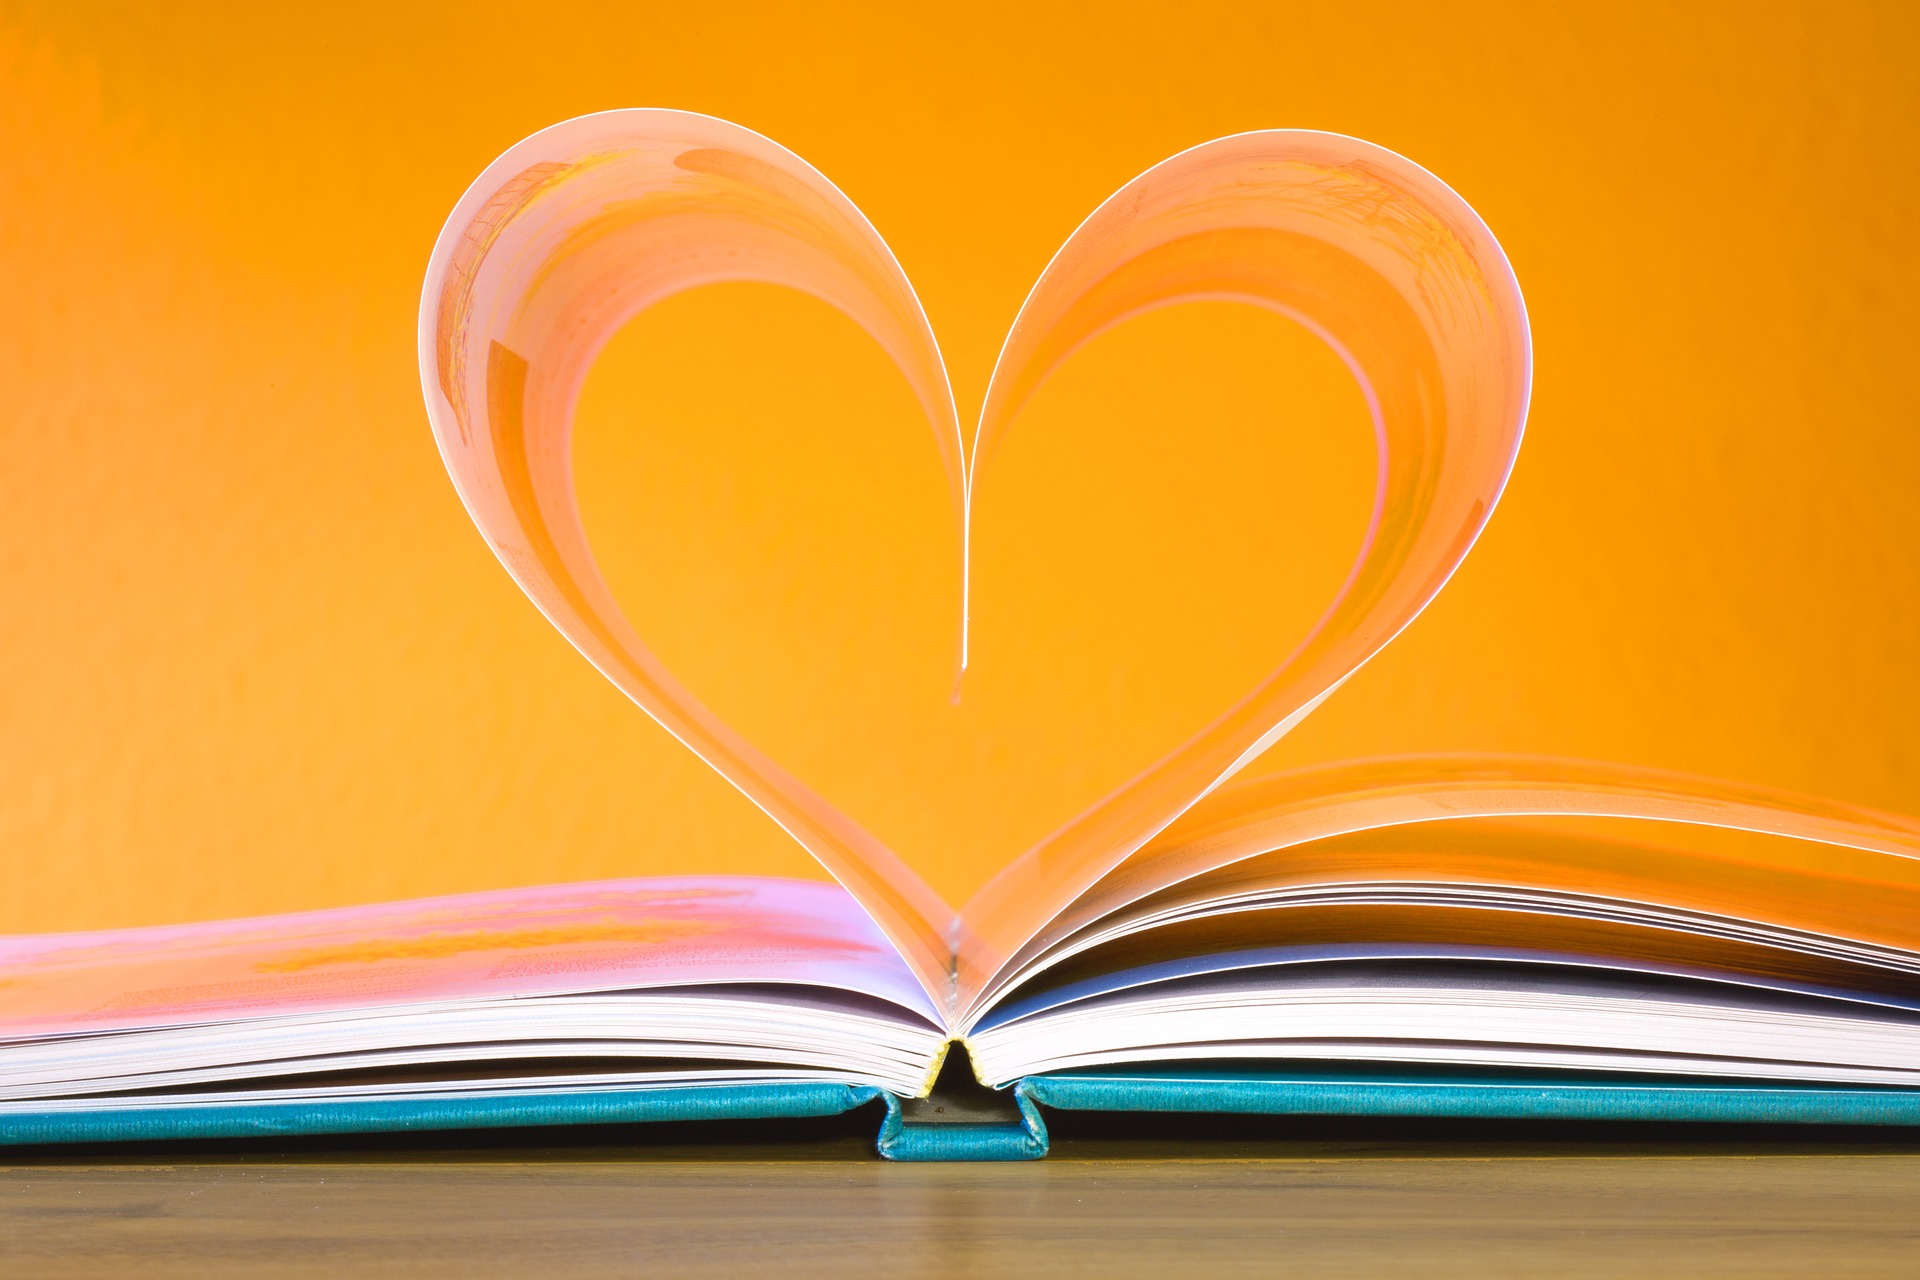 A book with it's pages forming a heart shape